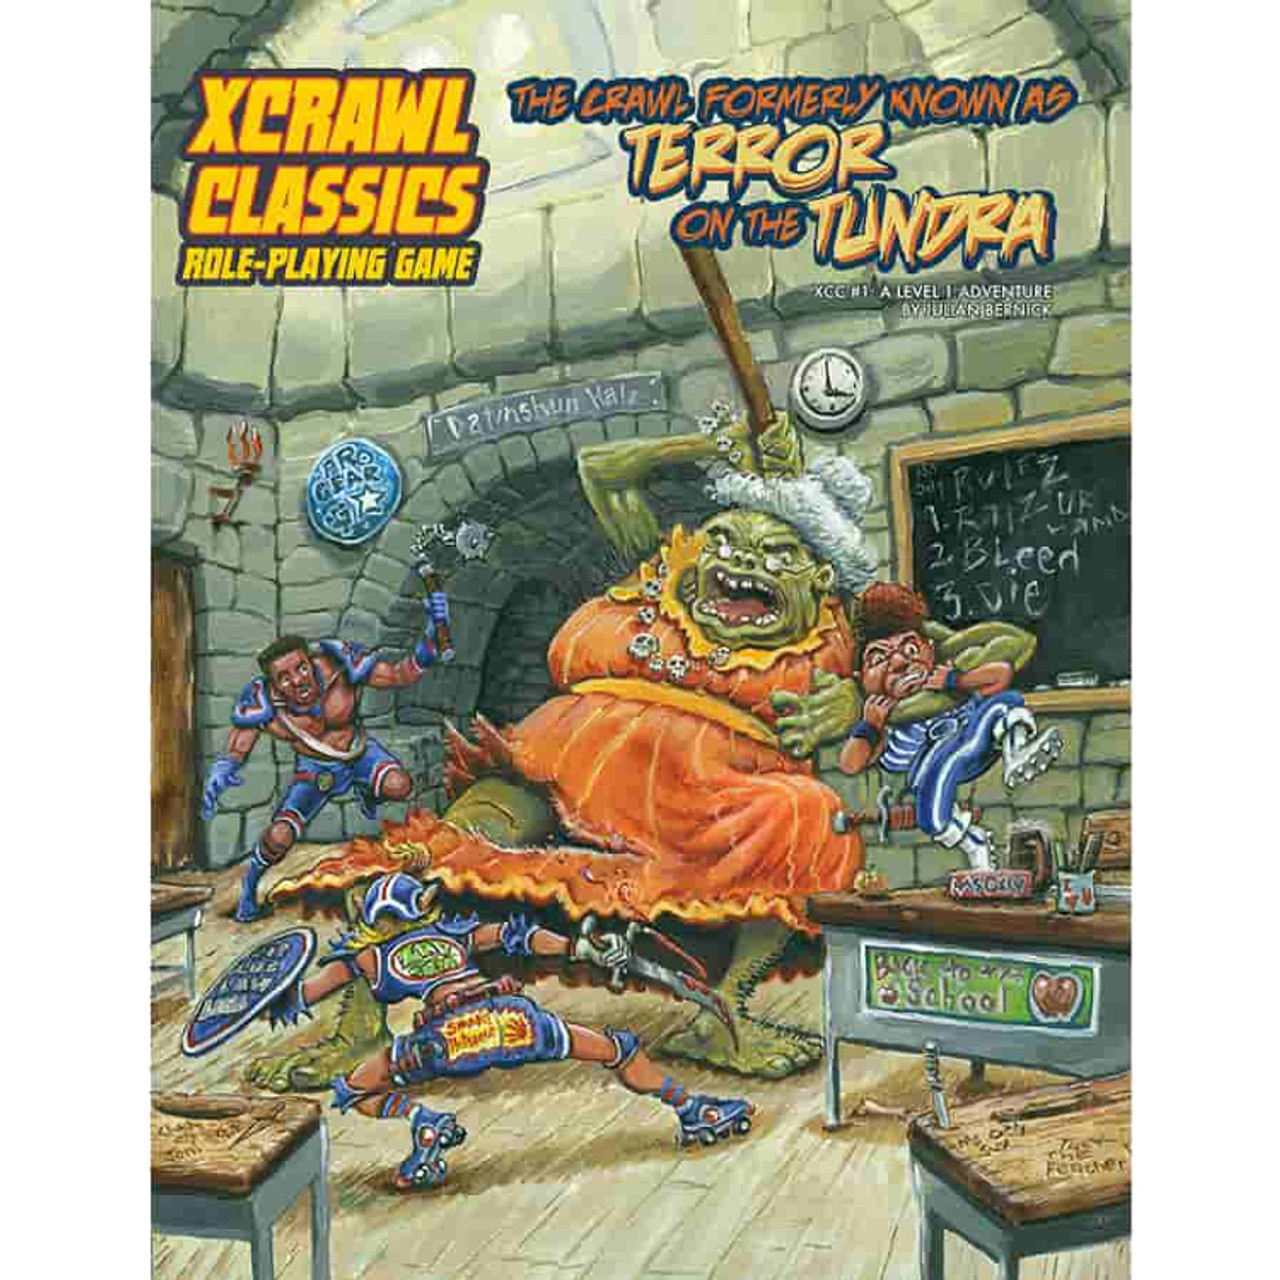 Xcrawl Classics RPG: #1 The Crawl Formerly Known as Terror on the Tundra  (EARLY BIRD PREORDER)